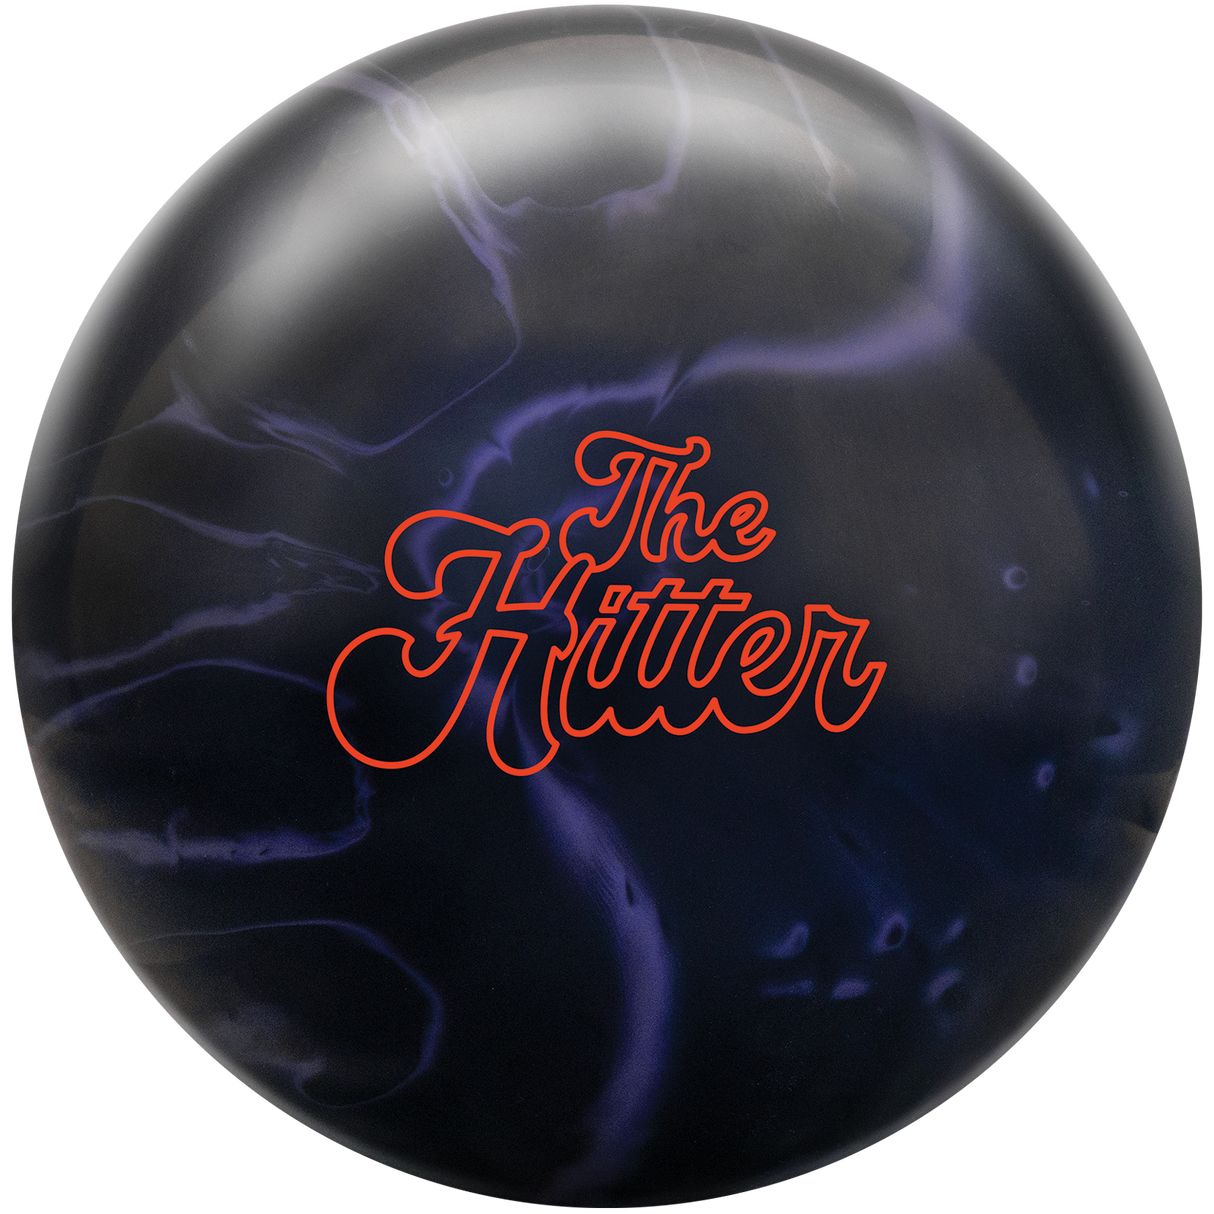 radical-the-hitter-bowling-ball insidebowling pro shop ray orf